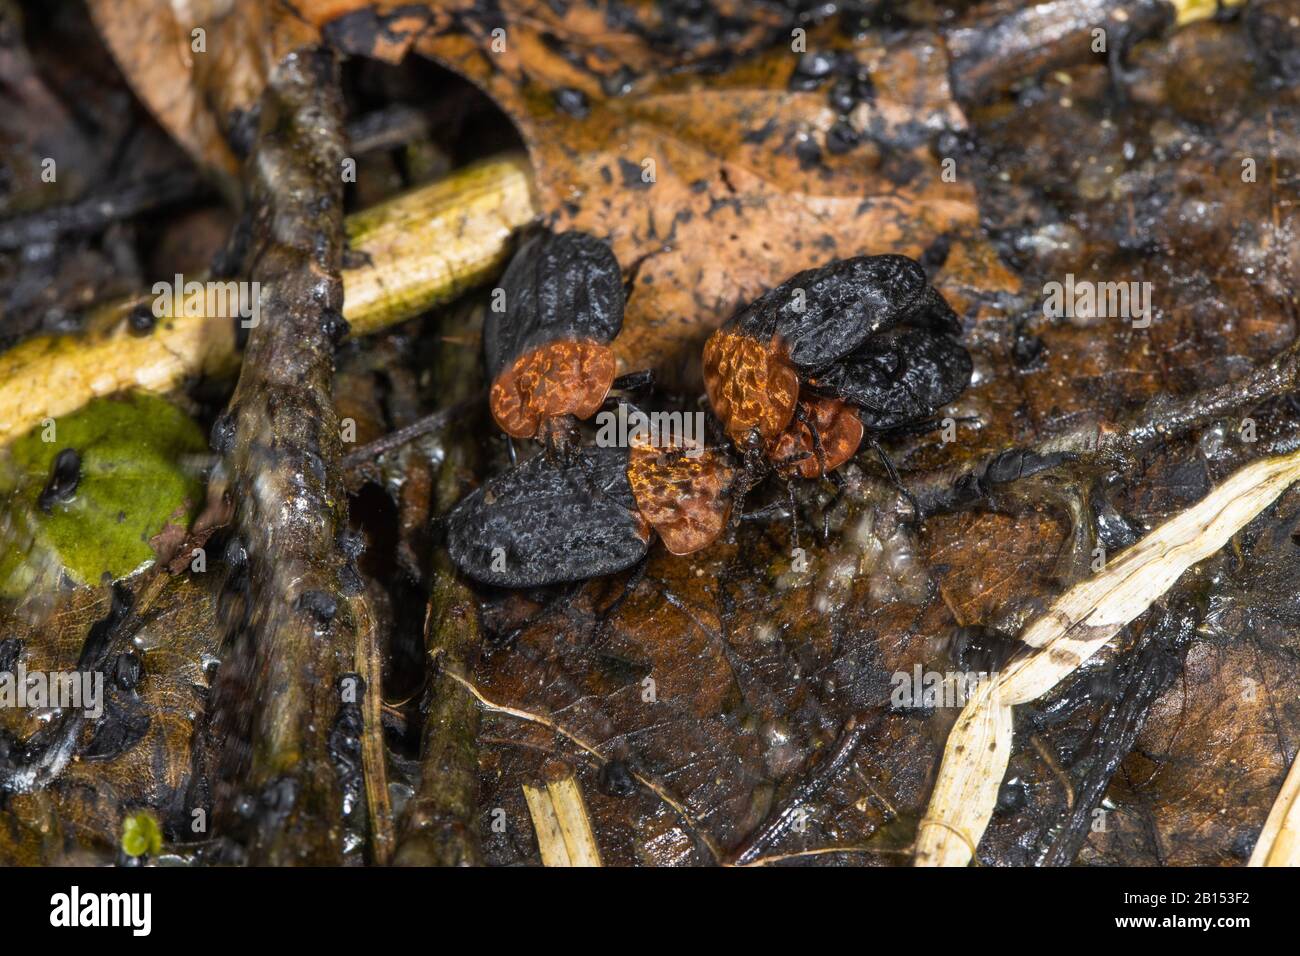 red-breasted carrion beetle (Oiceoptoma thoracica, Oiceoptoma thoracicum, Oeceoptoma thoracicum), silphids feeding dried grass frog spawn clumps, Germany, Bavaria Stock Photo